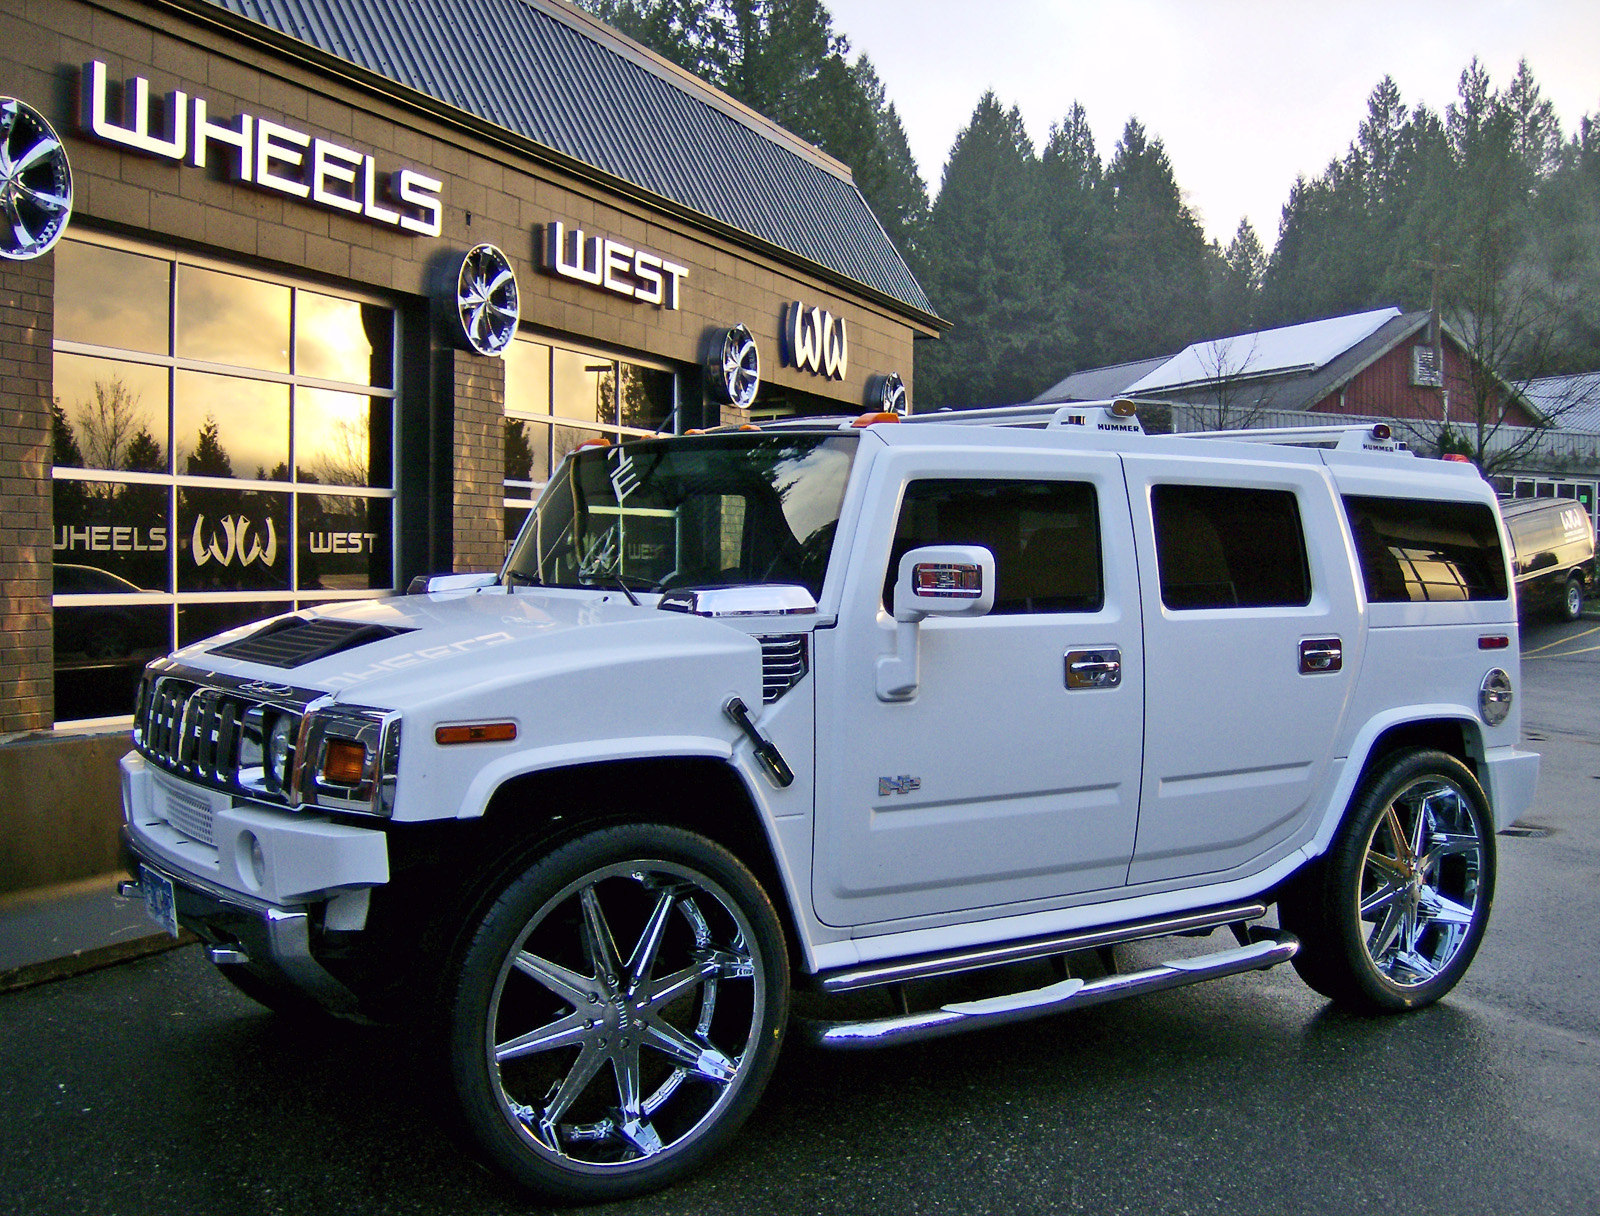 Hummer Car Wallpapers For Pc